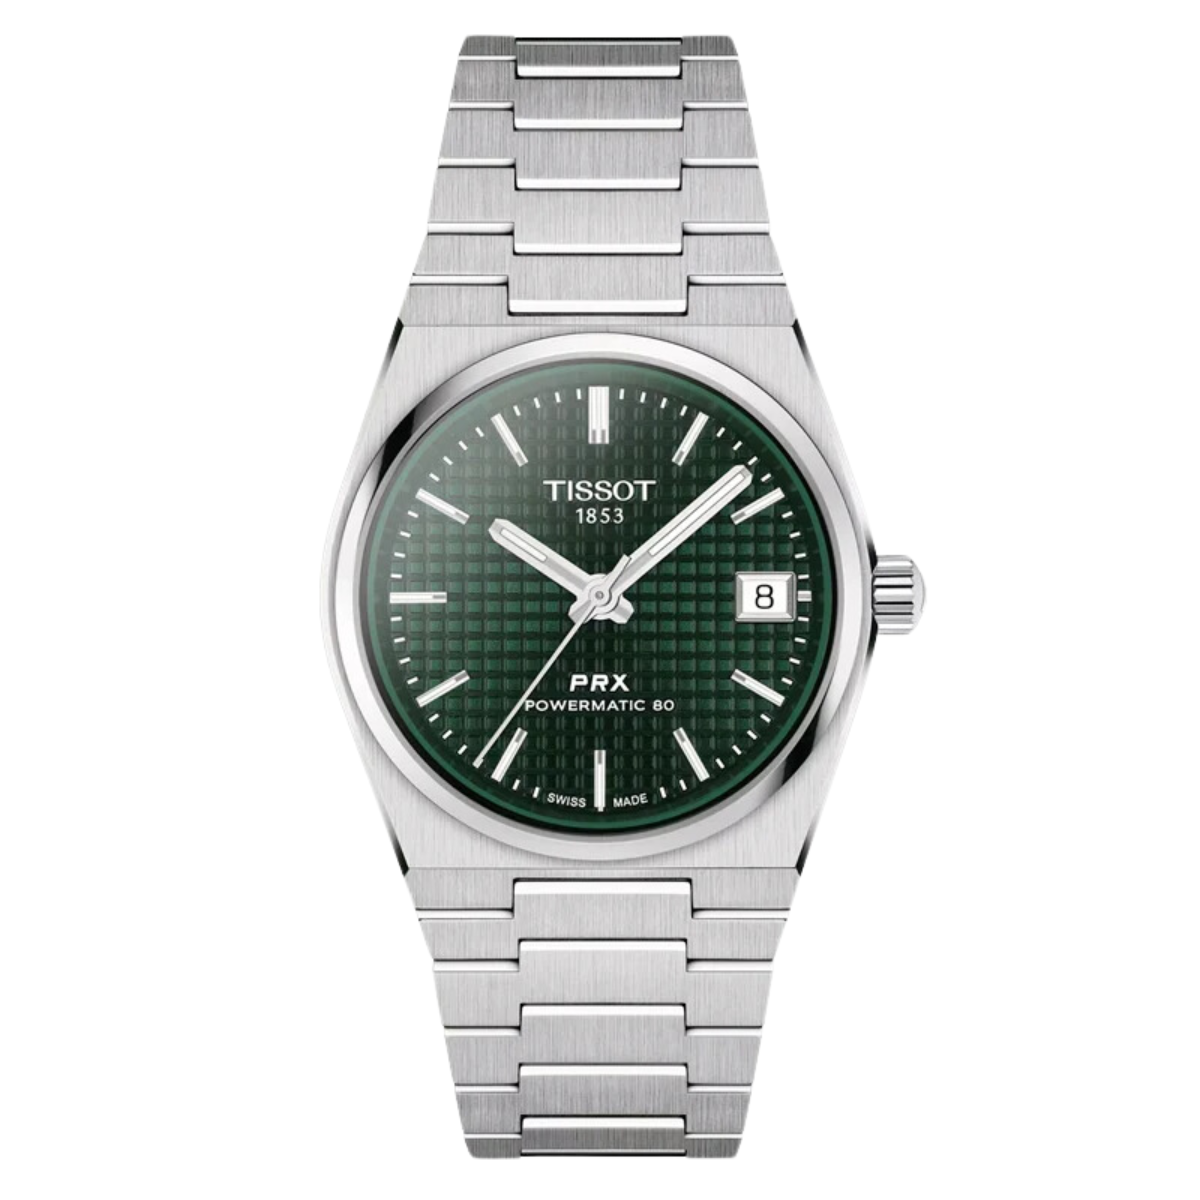 Tissot PRX Automatic Unisex T1372071109100 T137.207.11.091.00 Green Dial Mens Watch - Skywatches